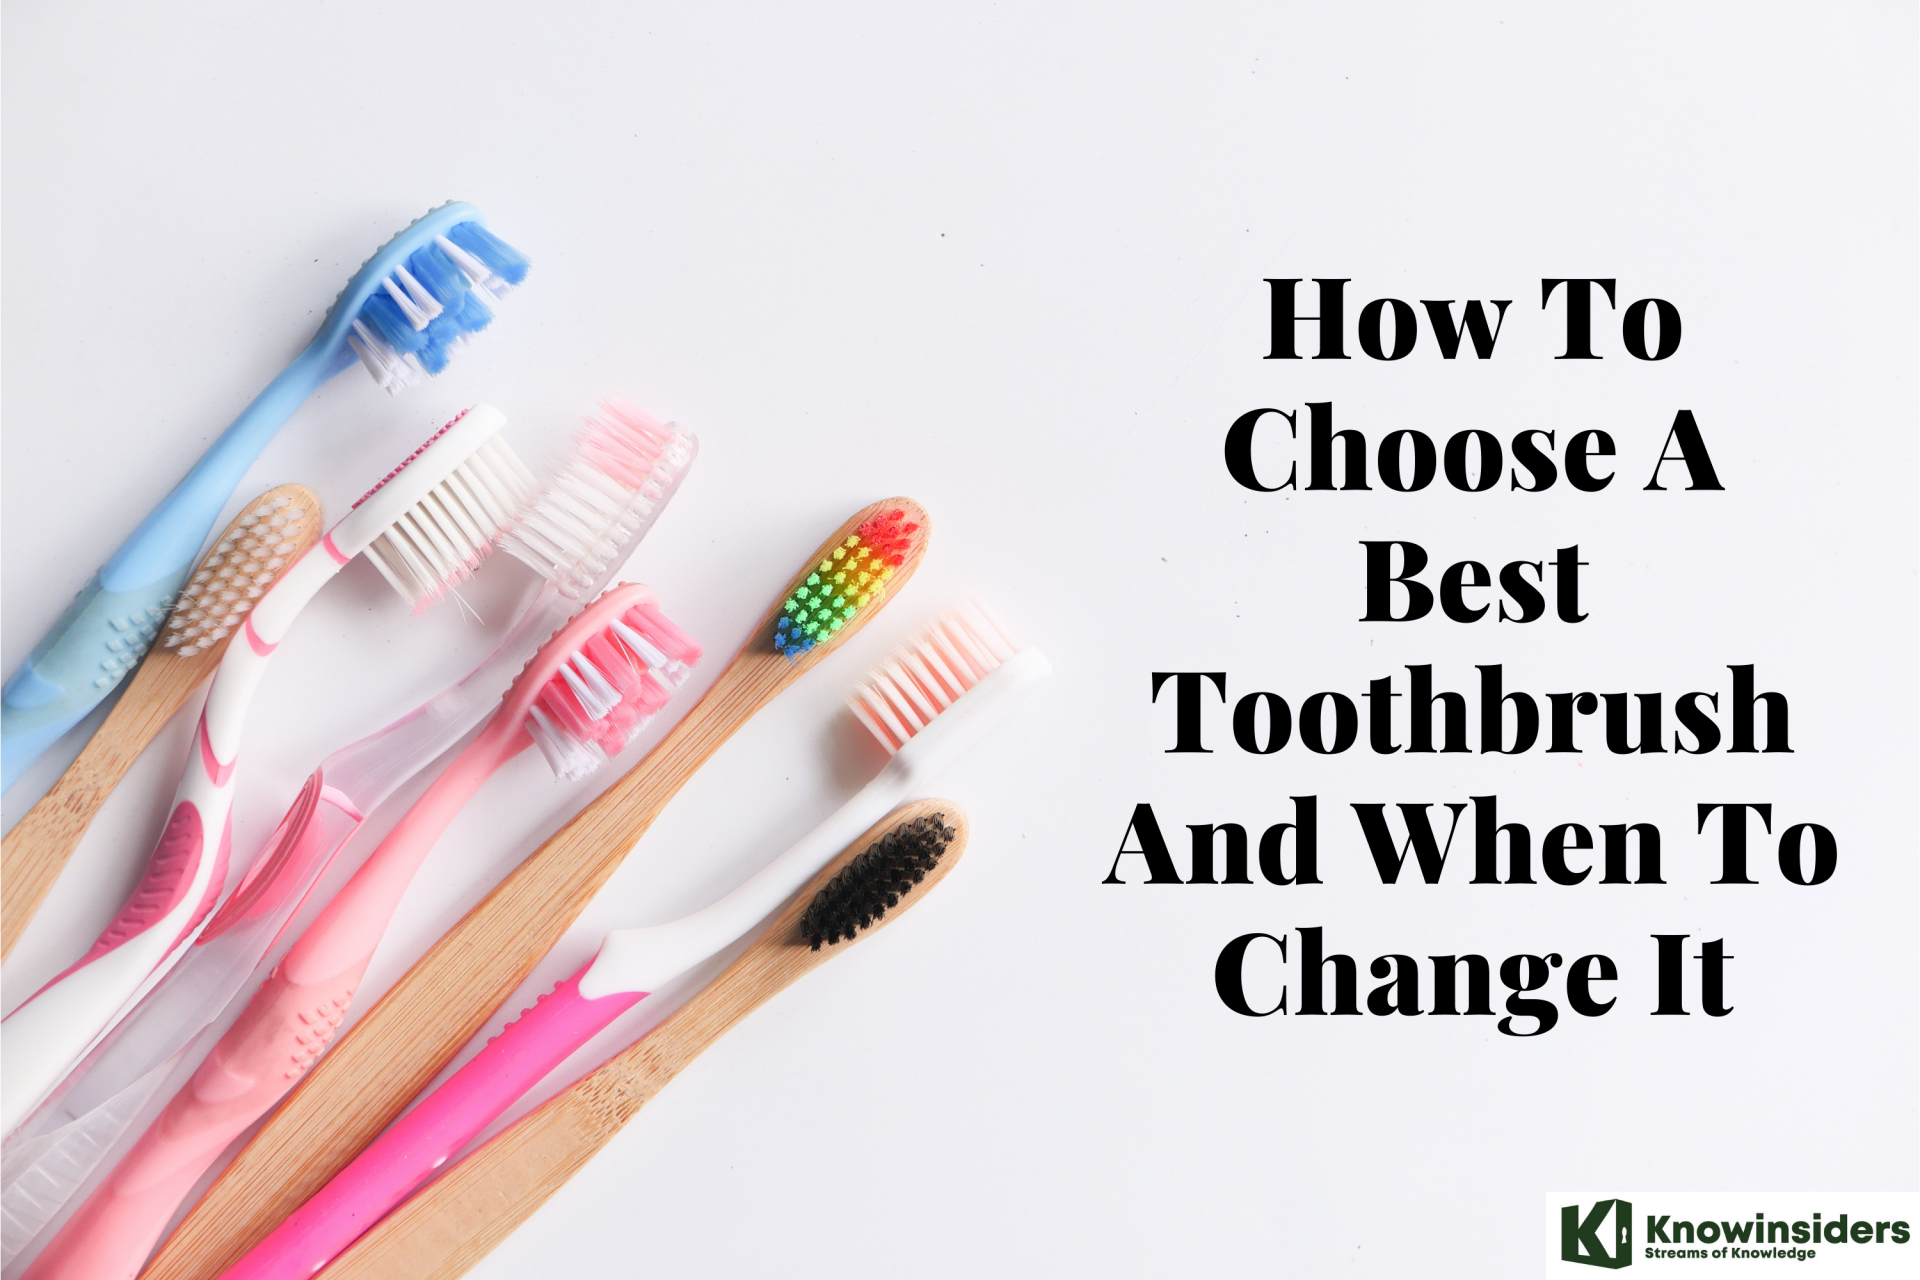 How To Choose A Best Toothbrush and When To Change It